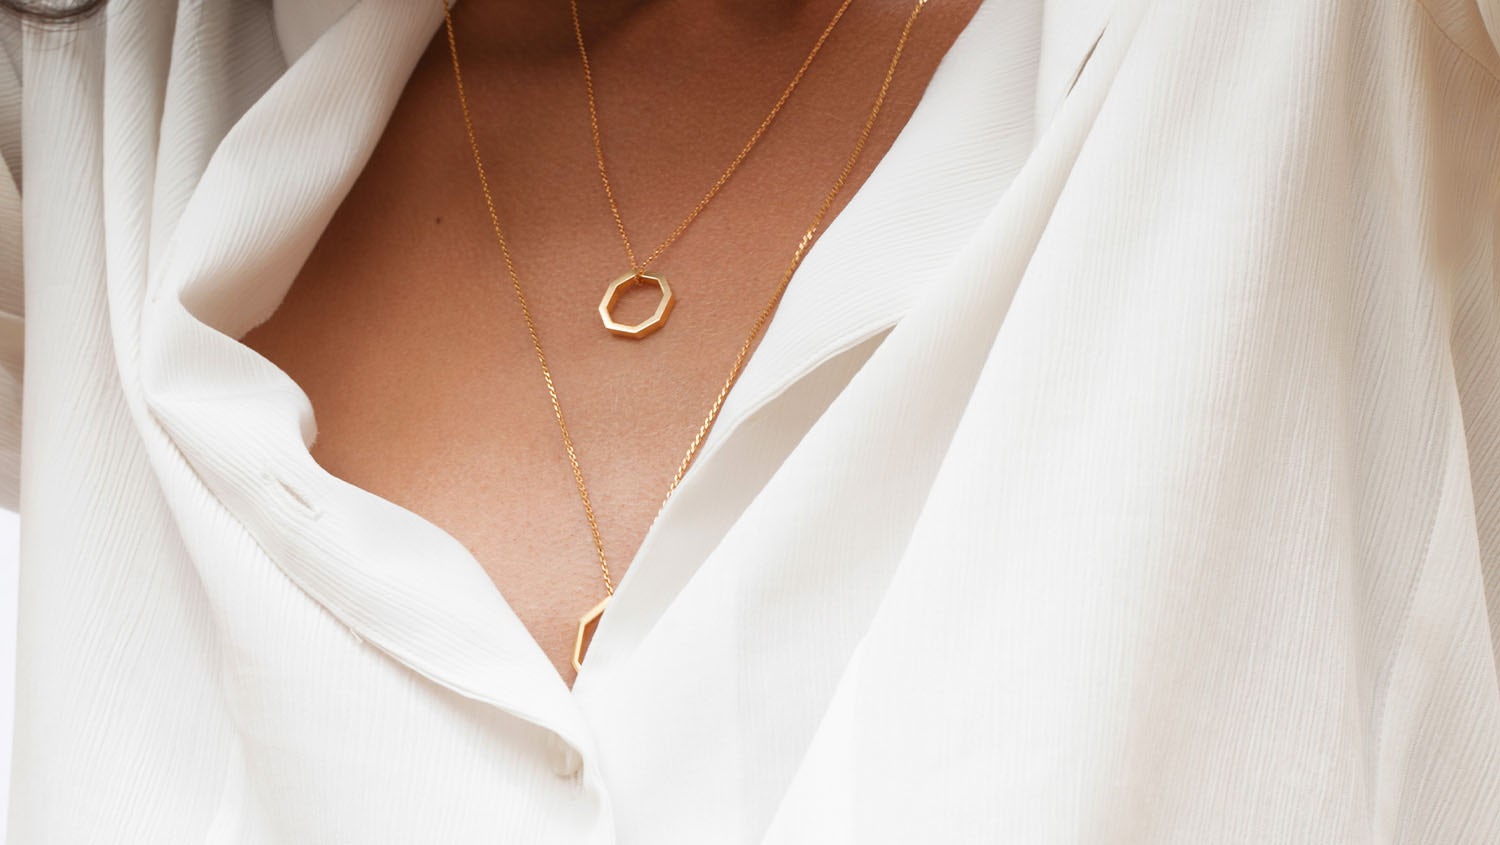 Our ethical gold necklaces Fairmined